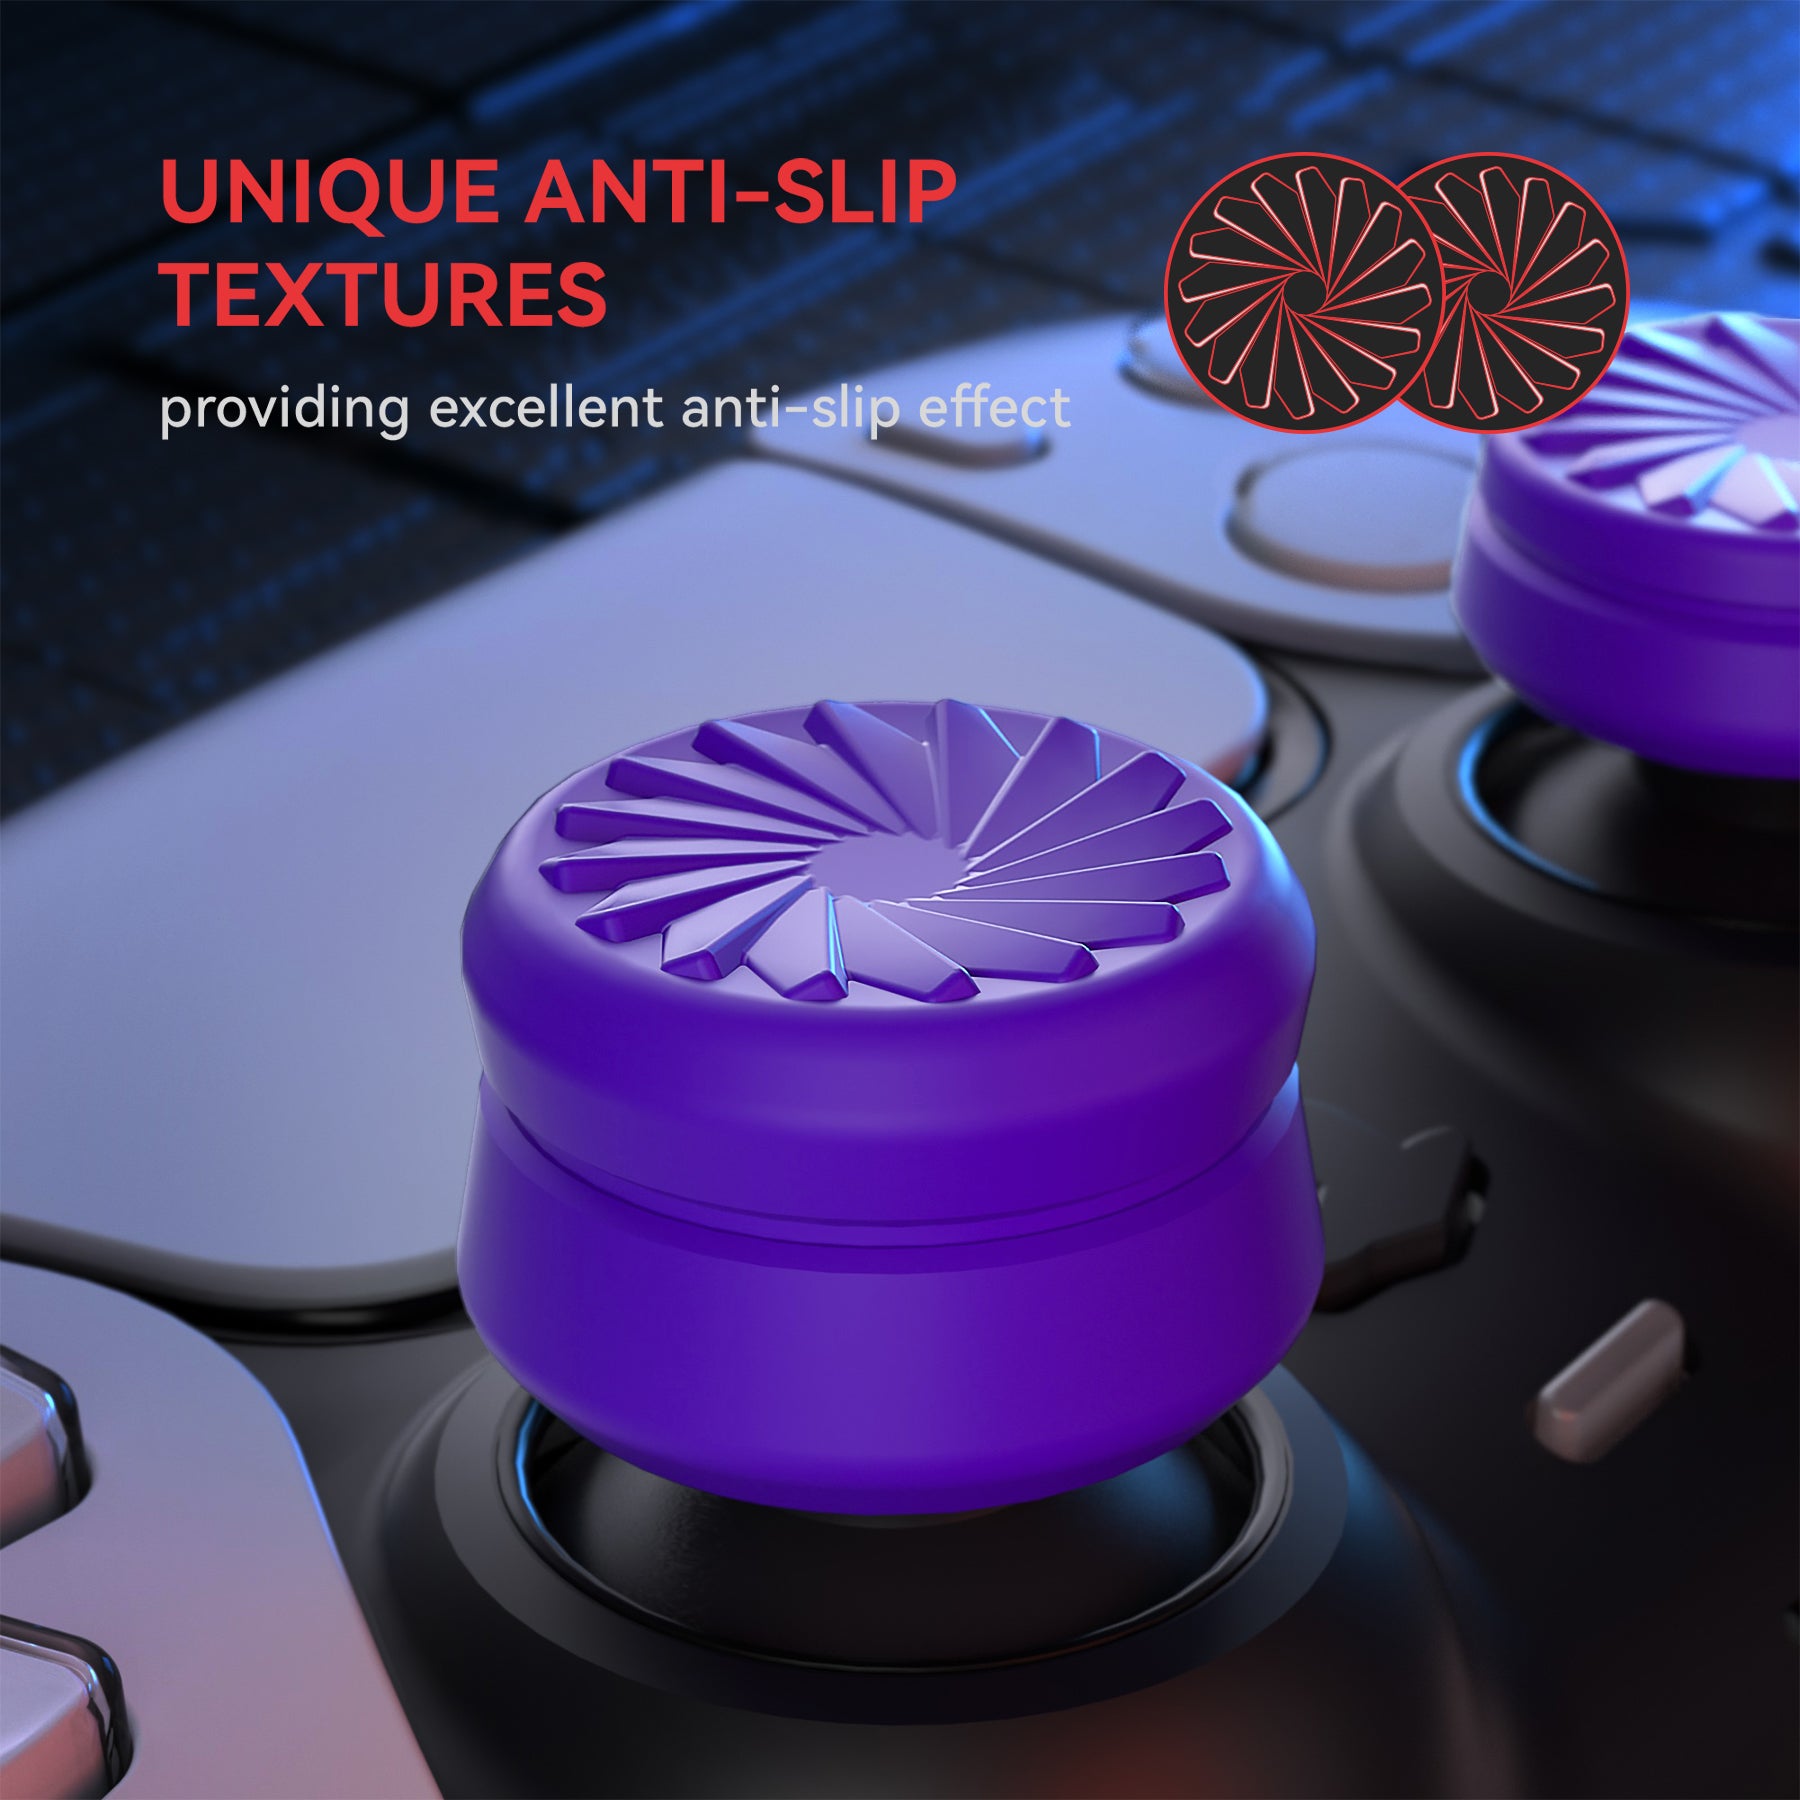 PlayVital 3 Height Turbine Thumbs Cushion Caps Thumb Grips for ps5, for ps4, Thumbstick Grip Cover for Xbox Core Wireless Controller, Thumb Grips for Xbox One, Elite Series 2, for Switch Pro - Purple - PJM3054 PlayVital